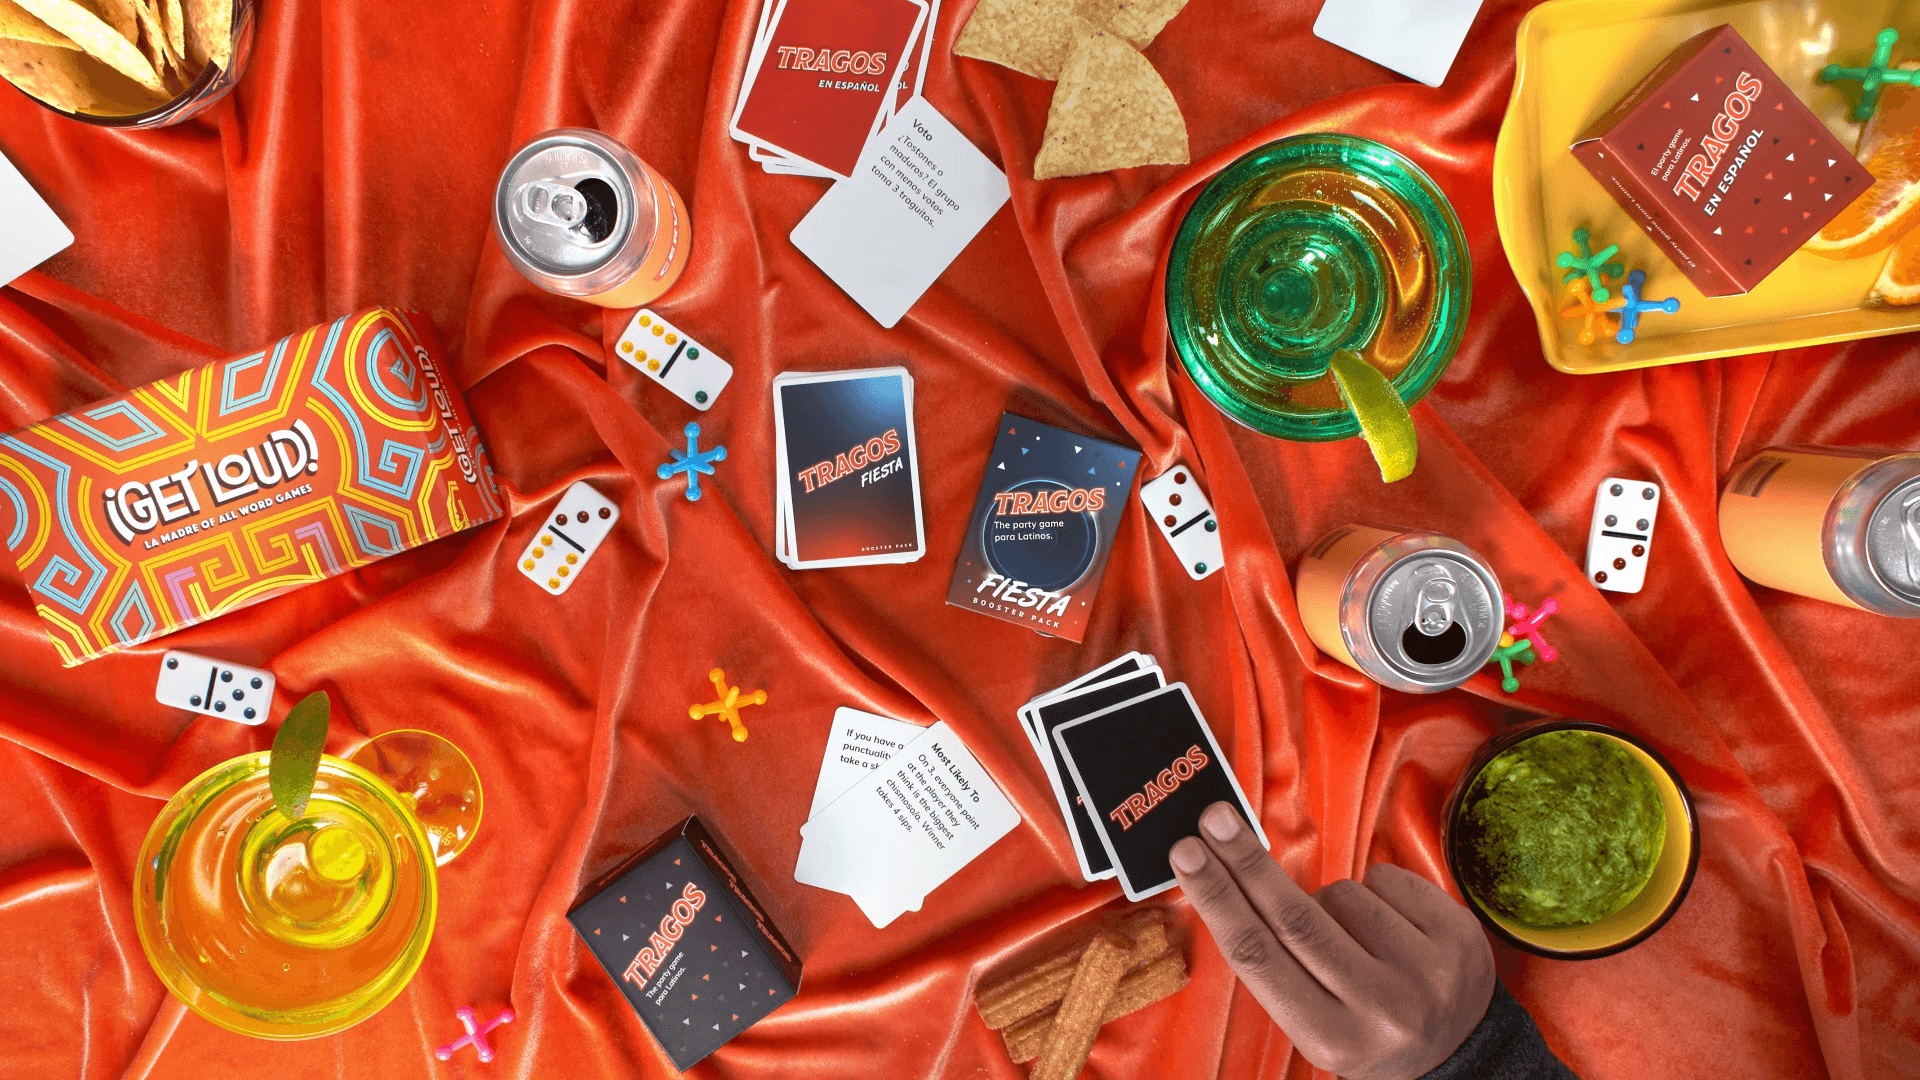 tragos party card game and get loud bilingual spanish board games